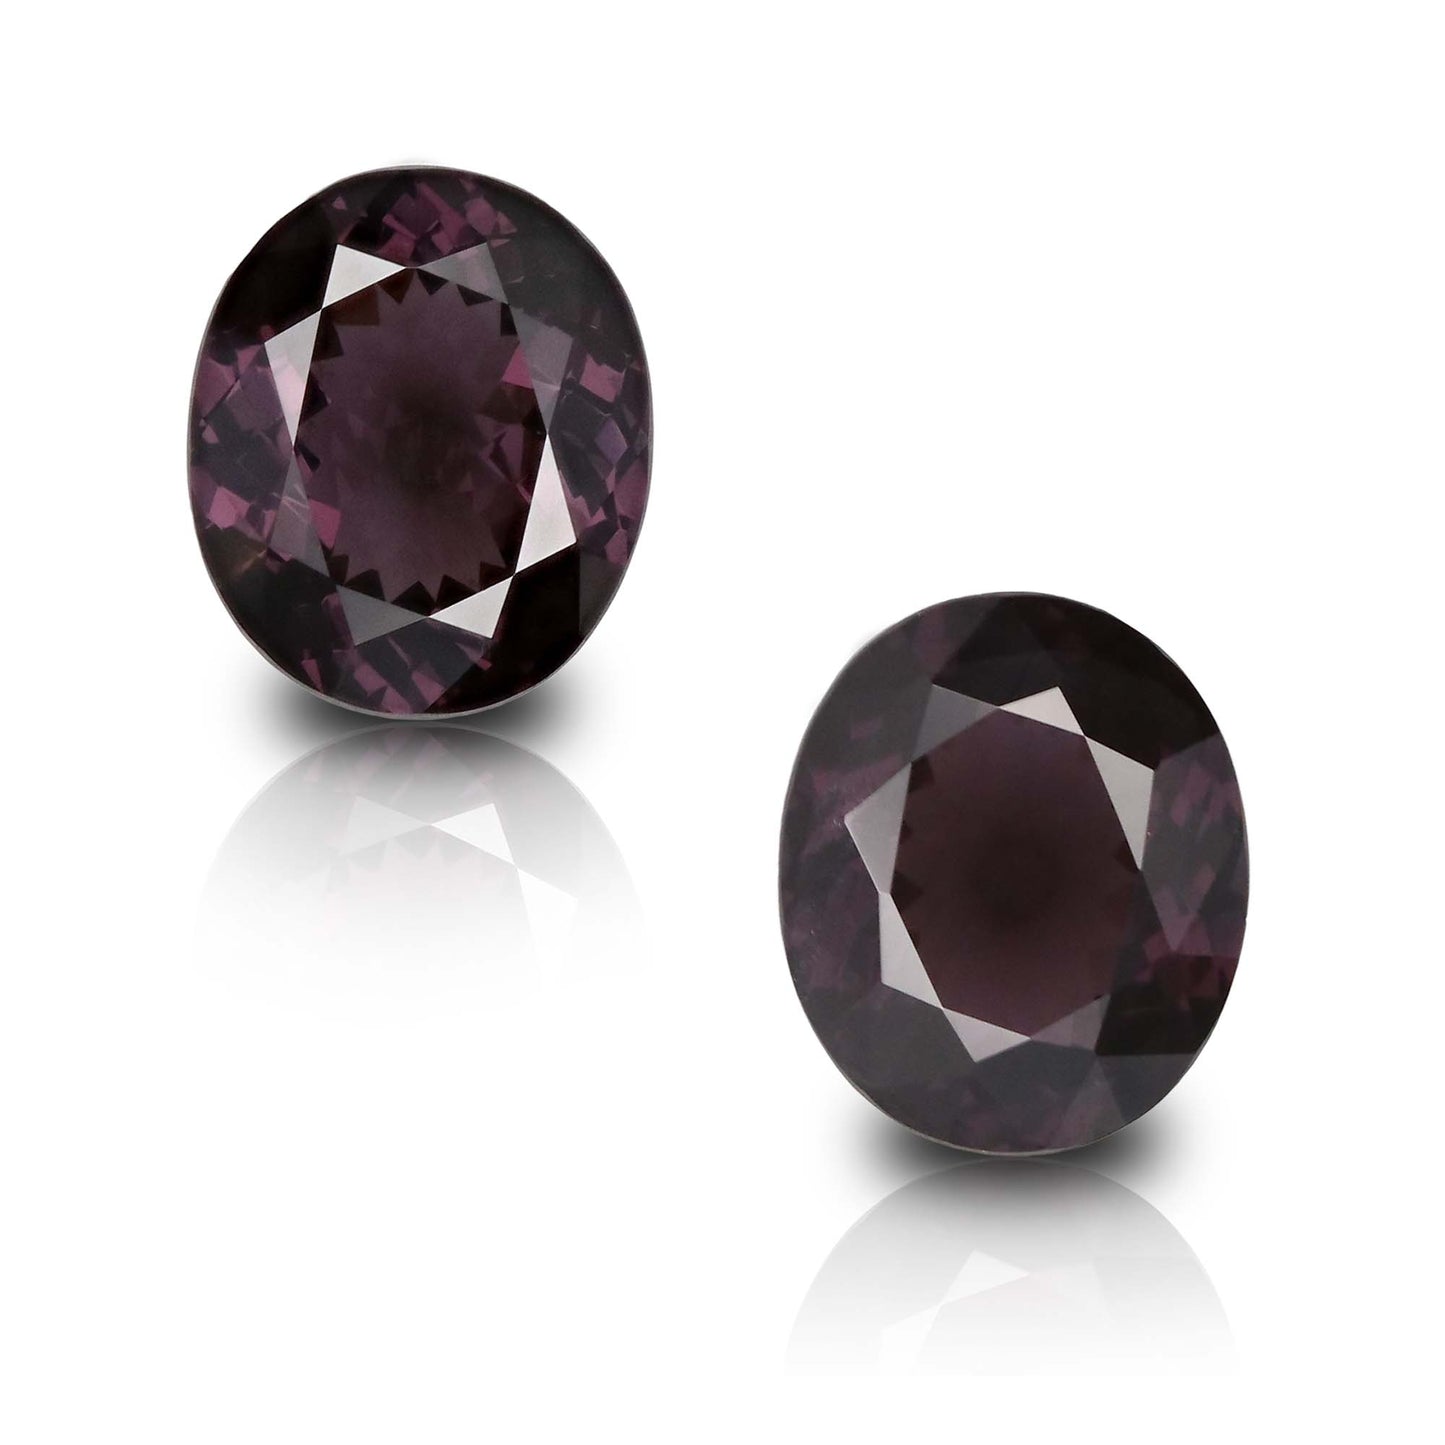 Natural Purple Spinel Pair 10.63 Total Carats